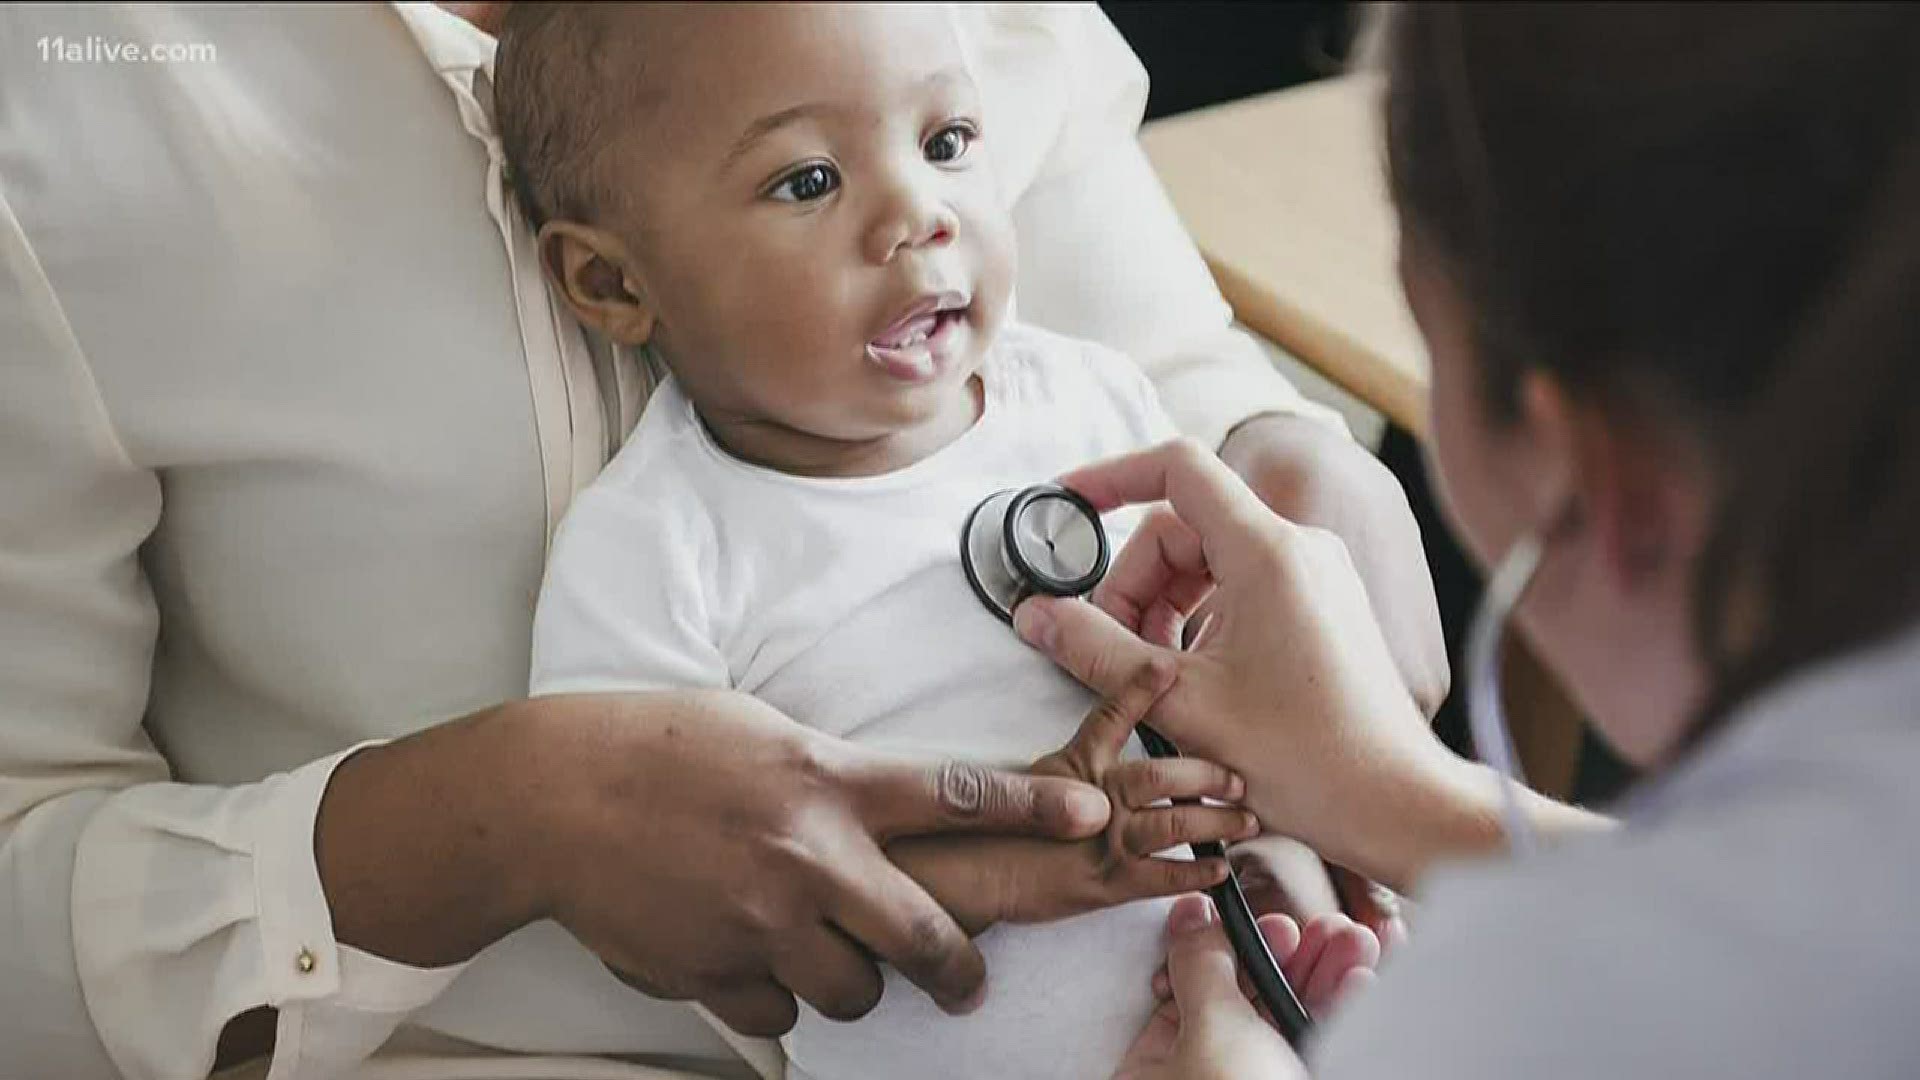 The American Academy of Pediatrics estimates 70 to 80% of children are not seeing their doctor right now.